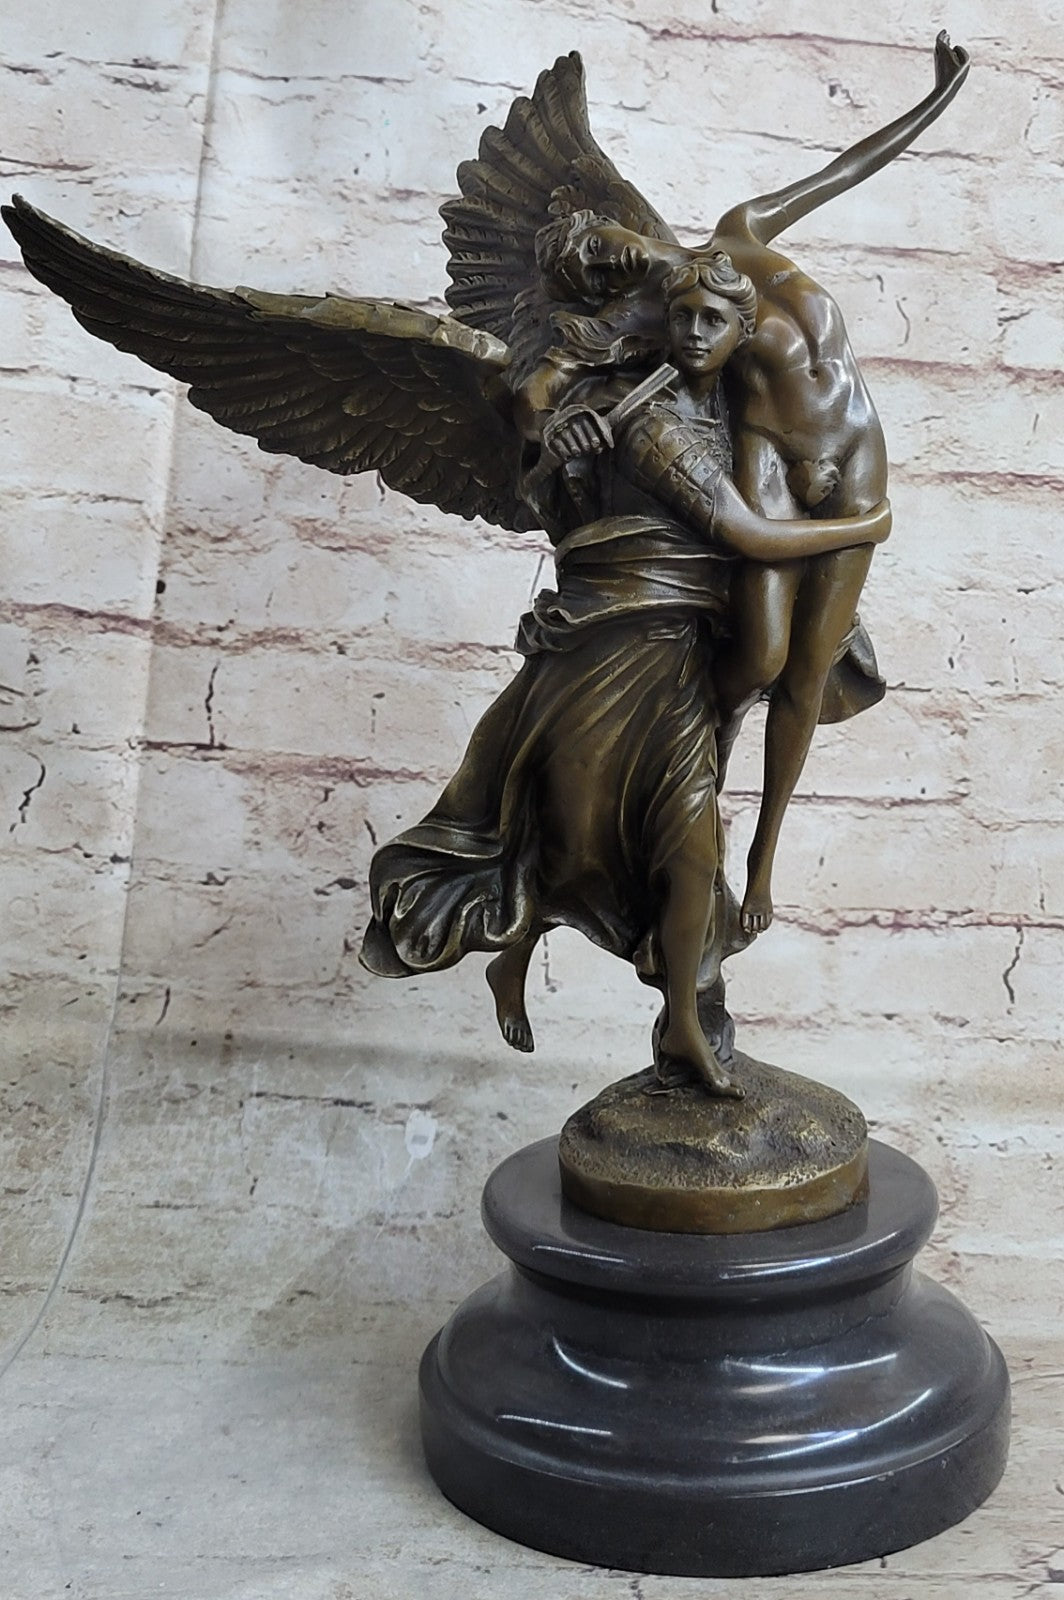 Bronze Statue Titled "Gloria Victis" the Winged Figure of Victory Hot Cast Figure